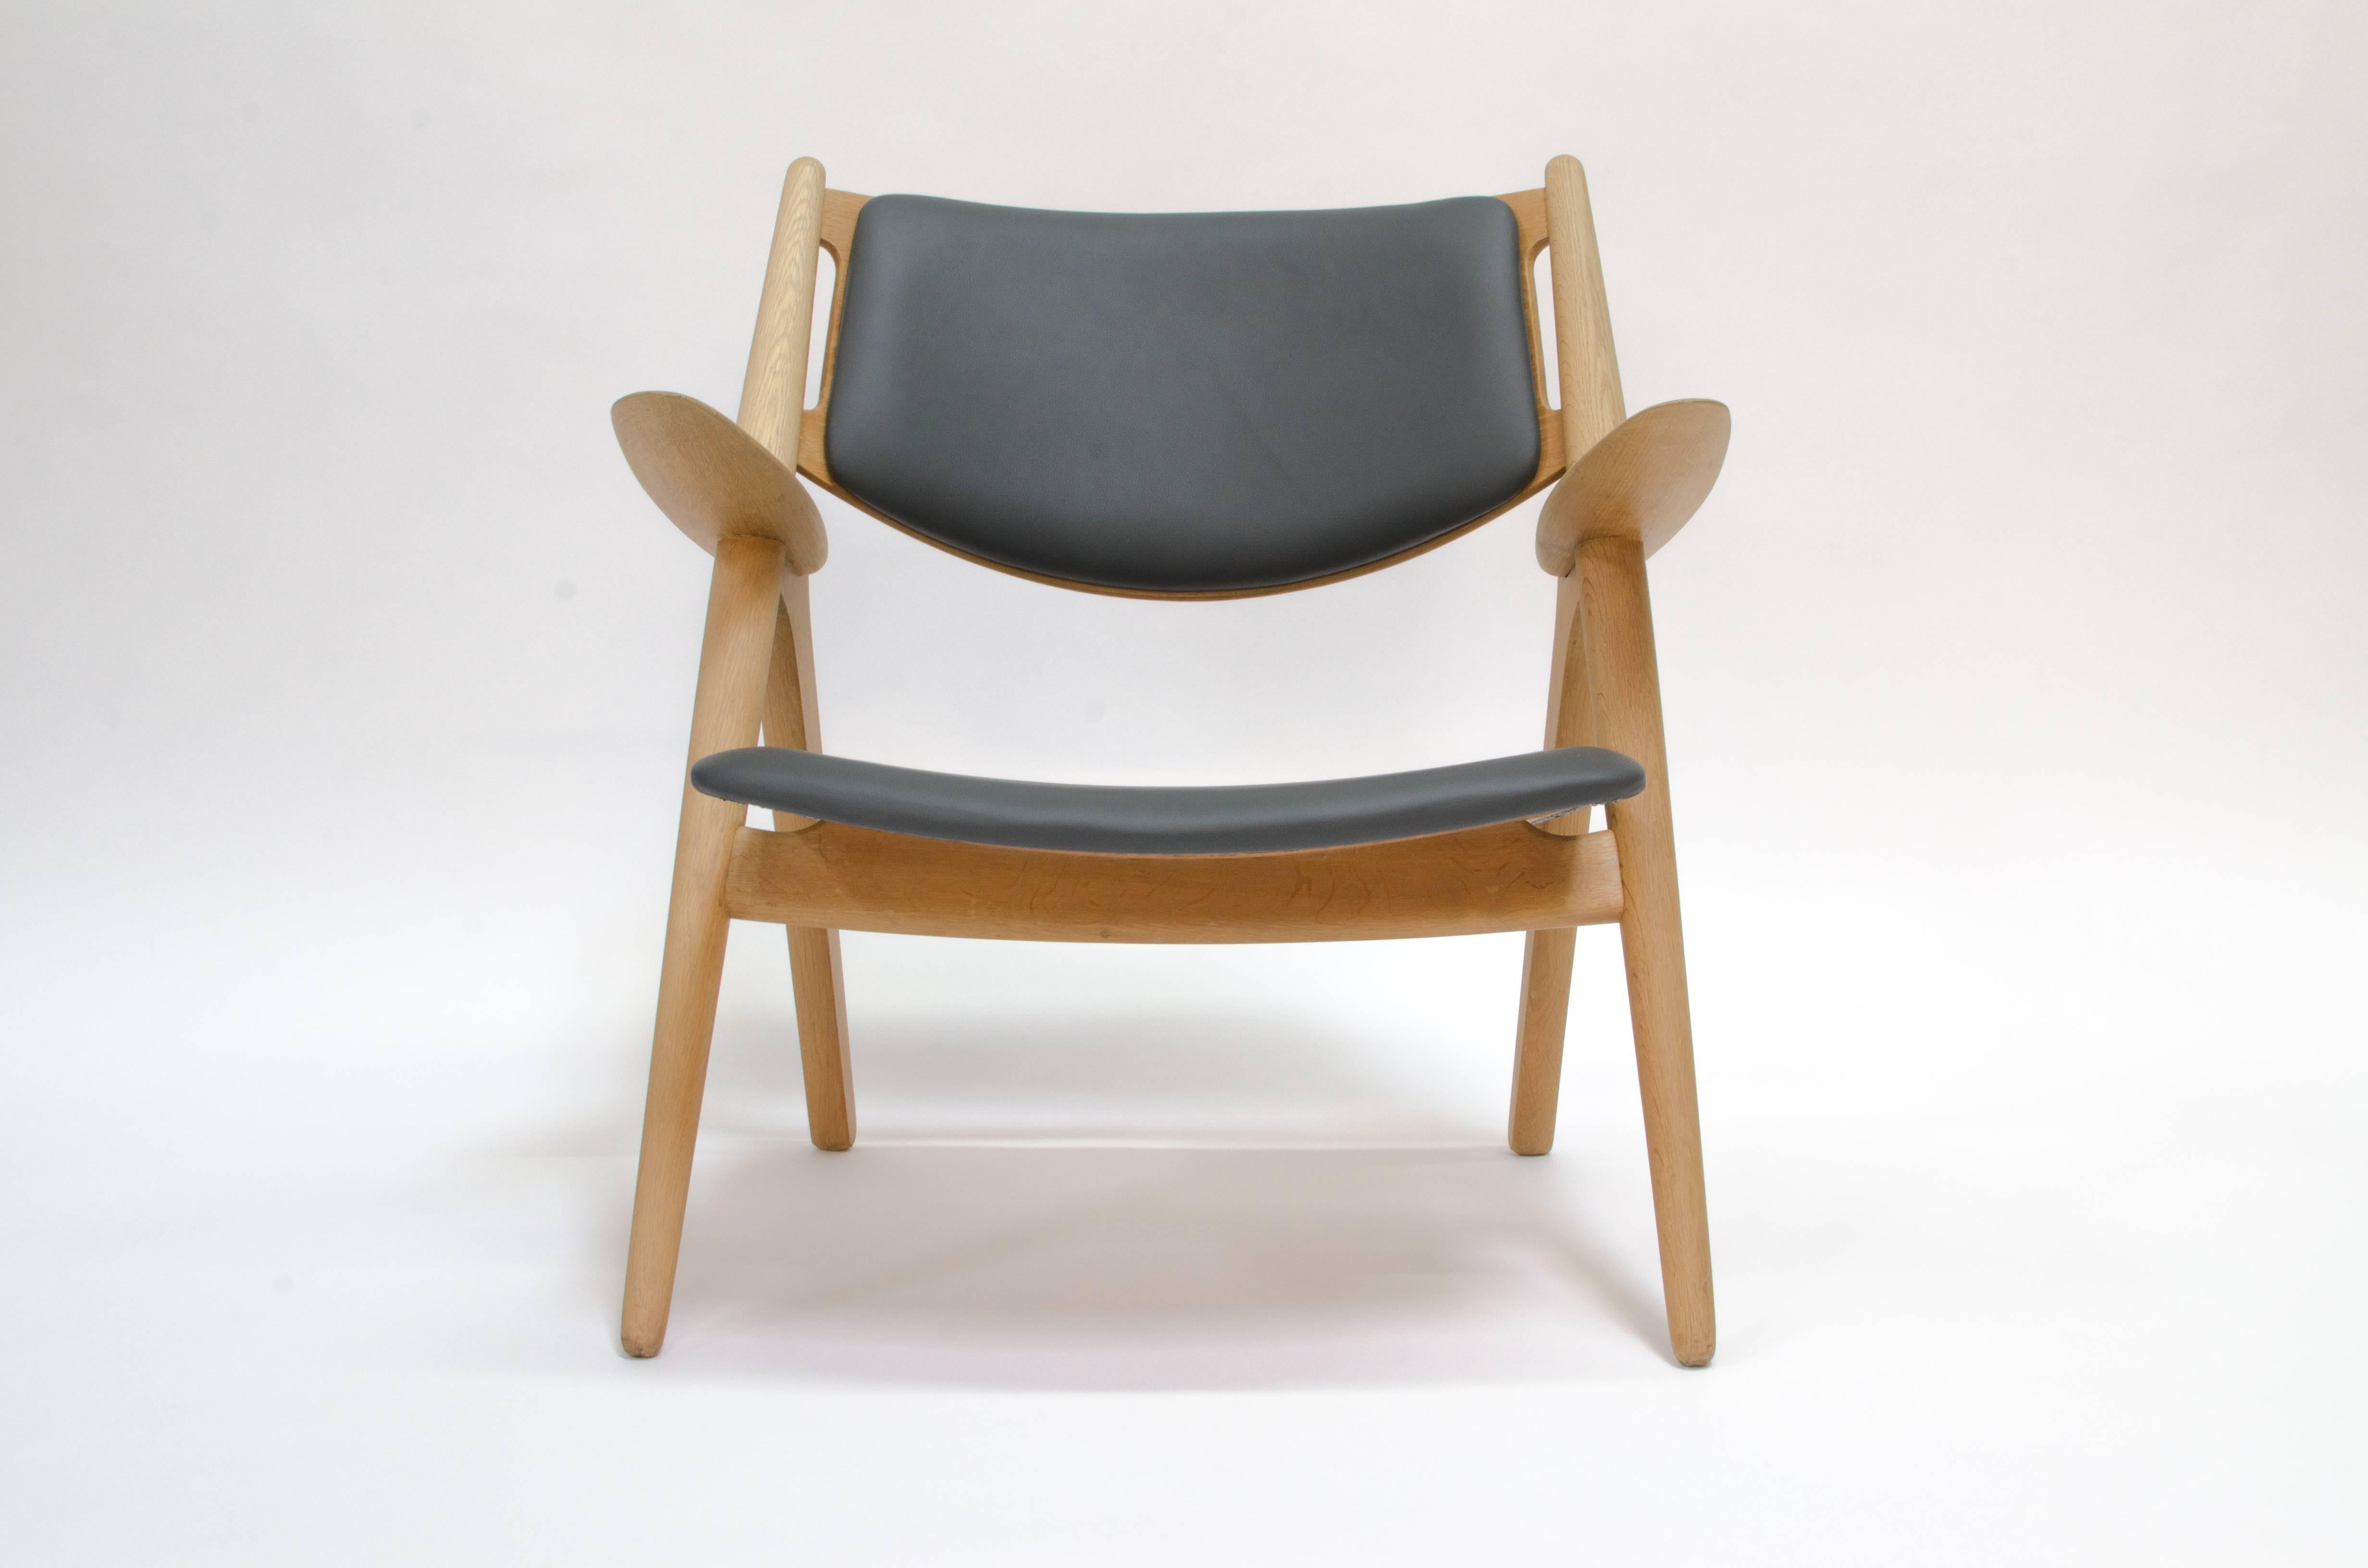 Offered is an early production Sawbuck lounge chair designed by Hans J. Wegner for Carl Hansen & Sons. This is an early production chair in excellent condition. It has been correctly reupholstered with Elmo (Sweden) leather, and the oak has the